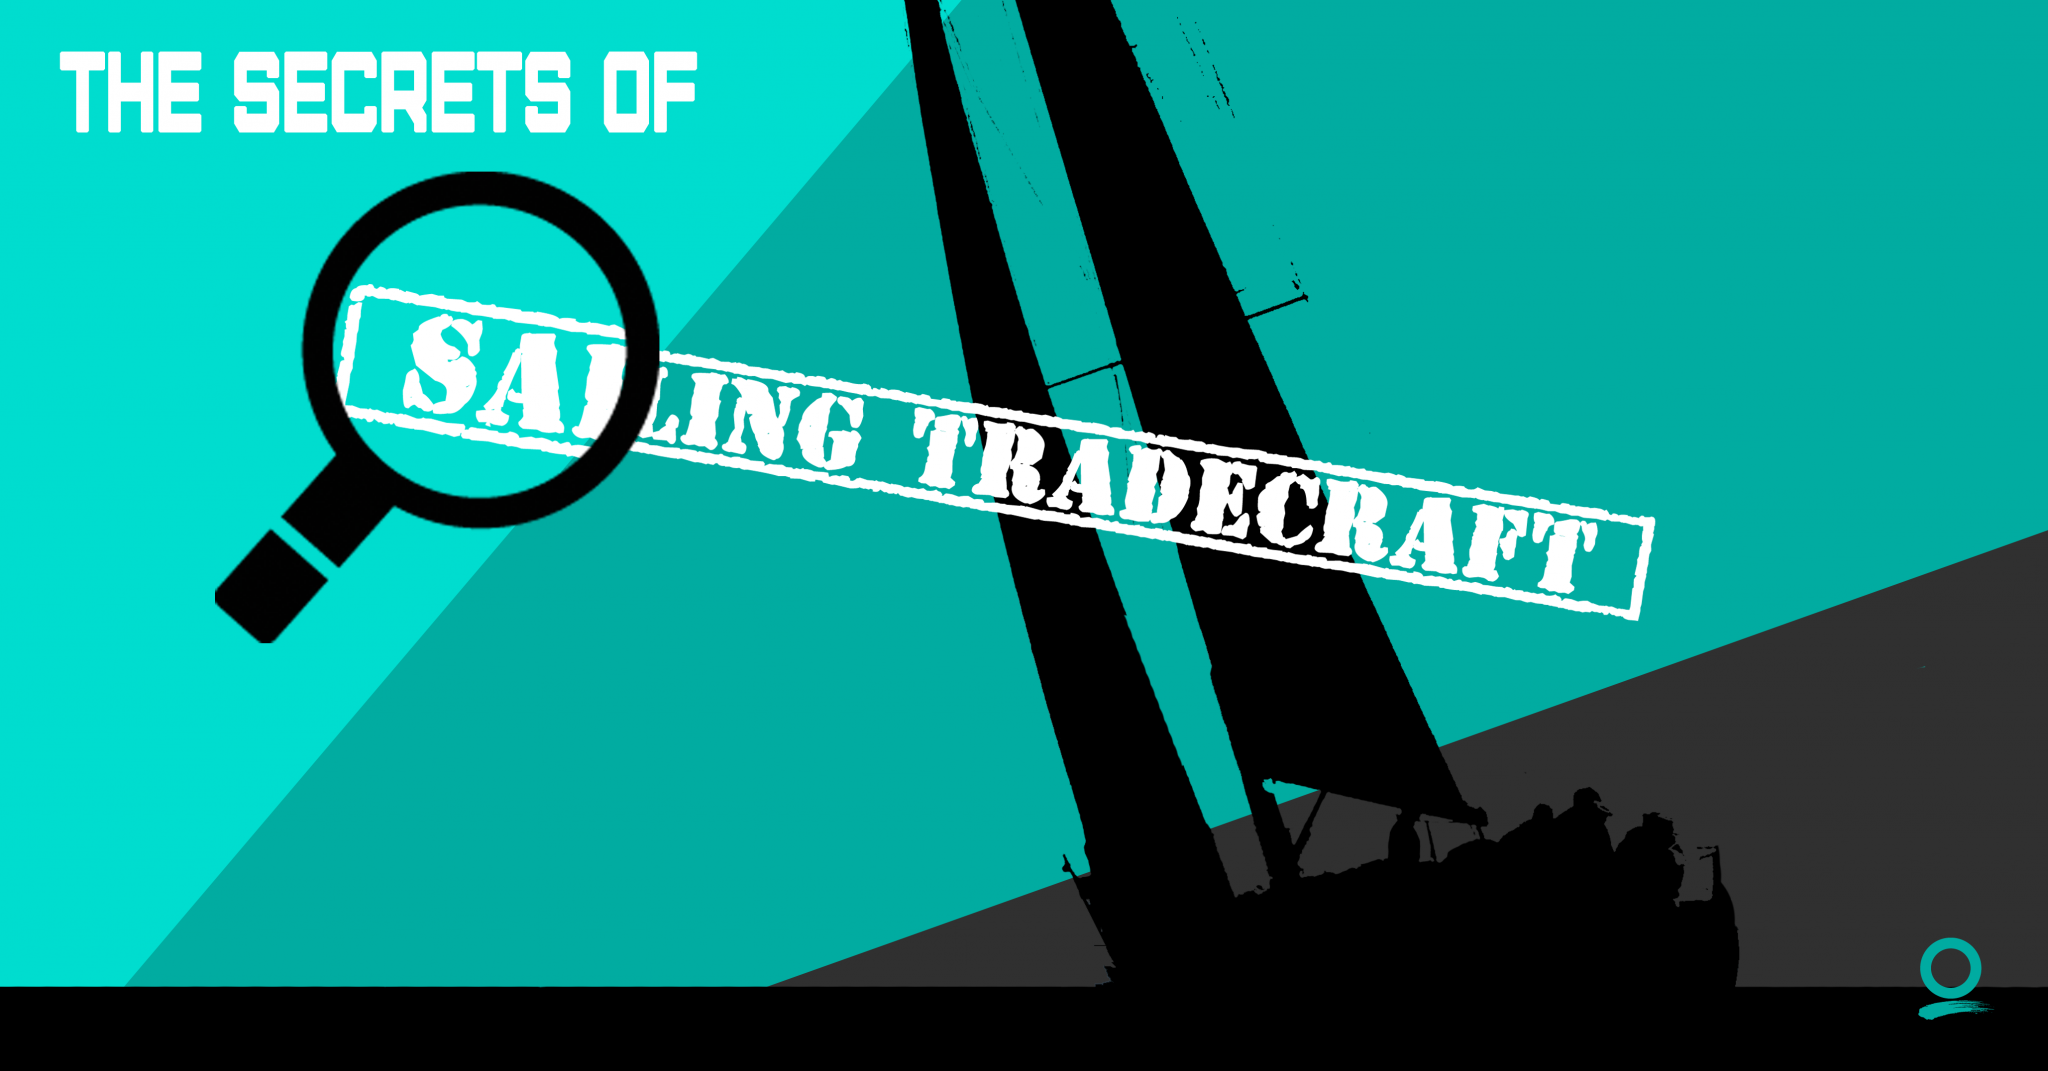 how-to-turn-a-good-crew-into-a-great-team-the-secrets-of-sailing-tradecraft